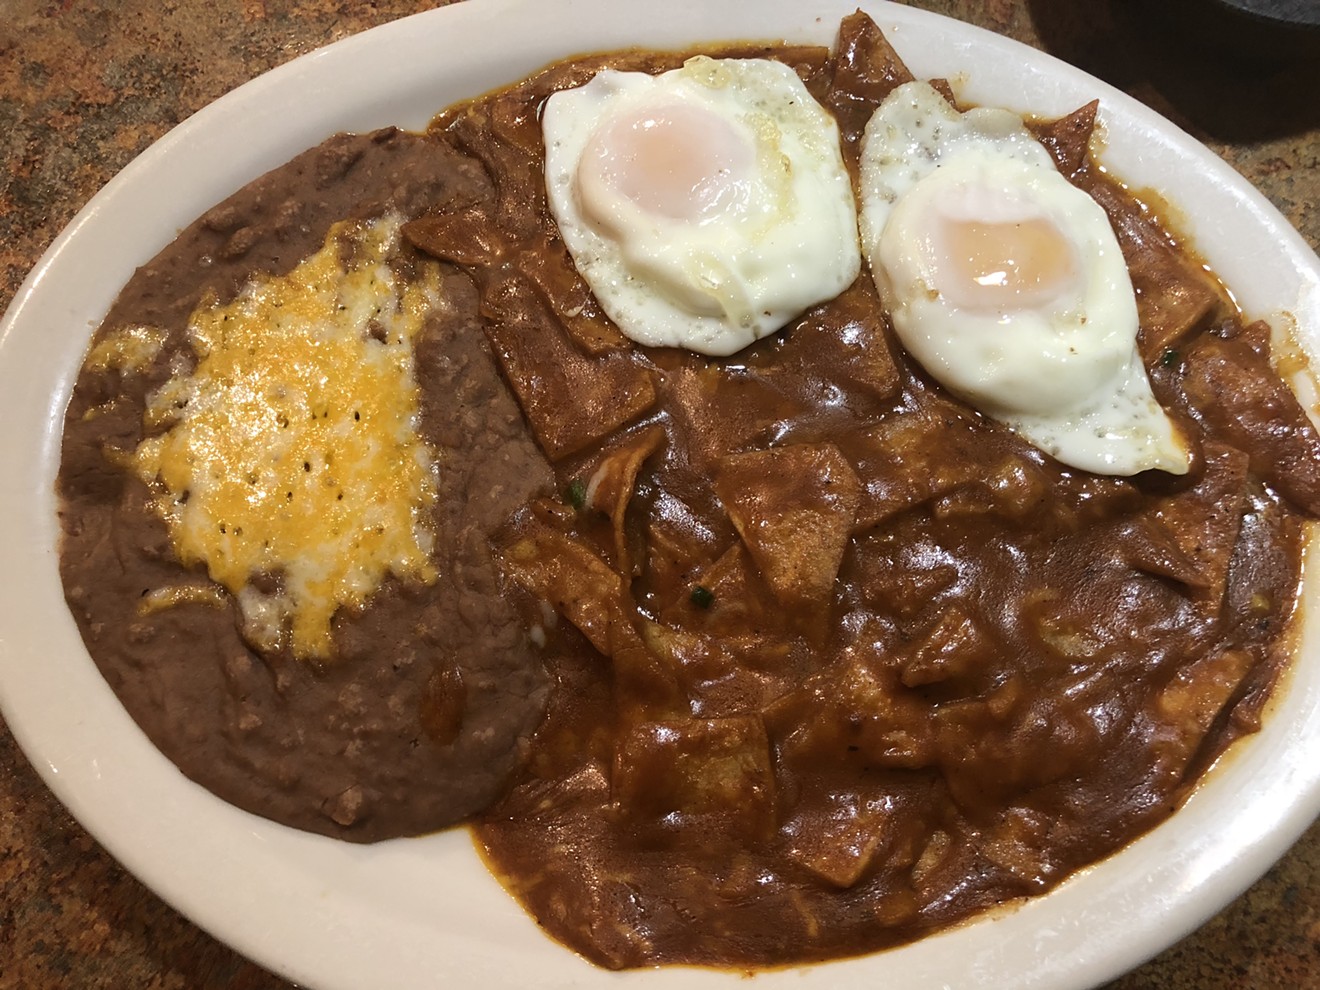 Chilaquiles rojo, with eggs over easy